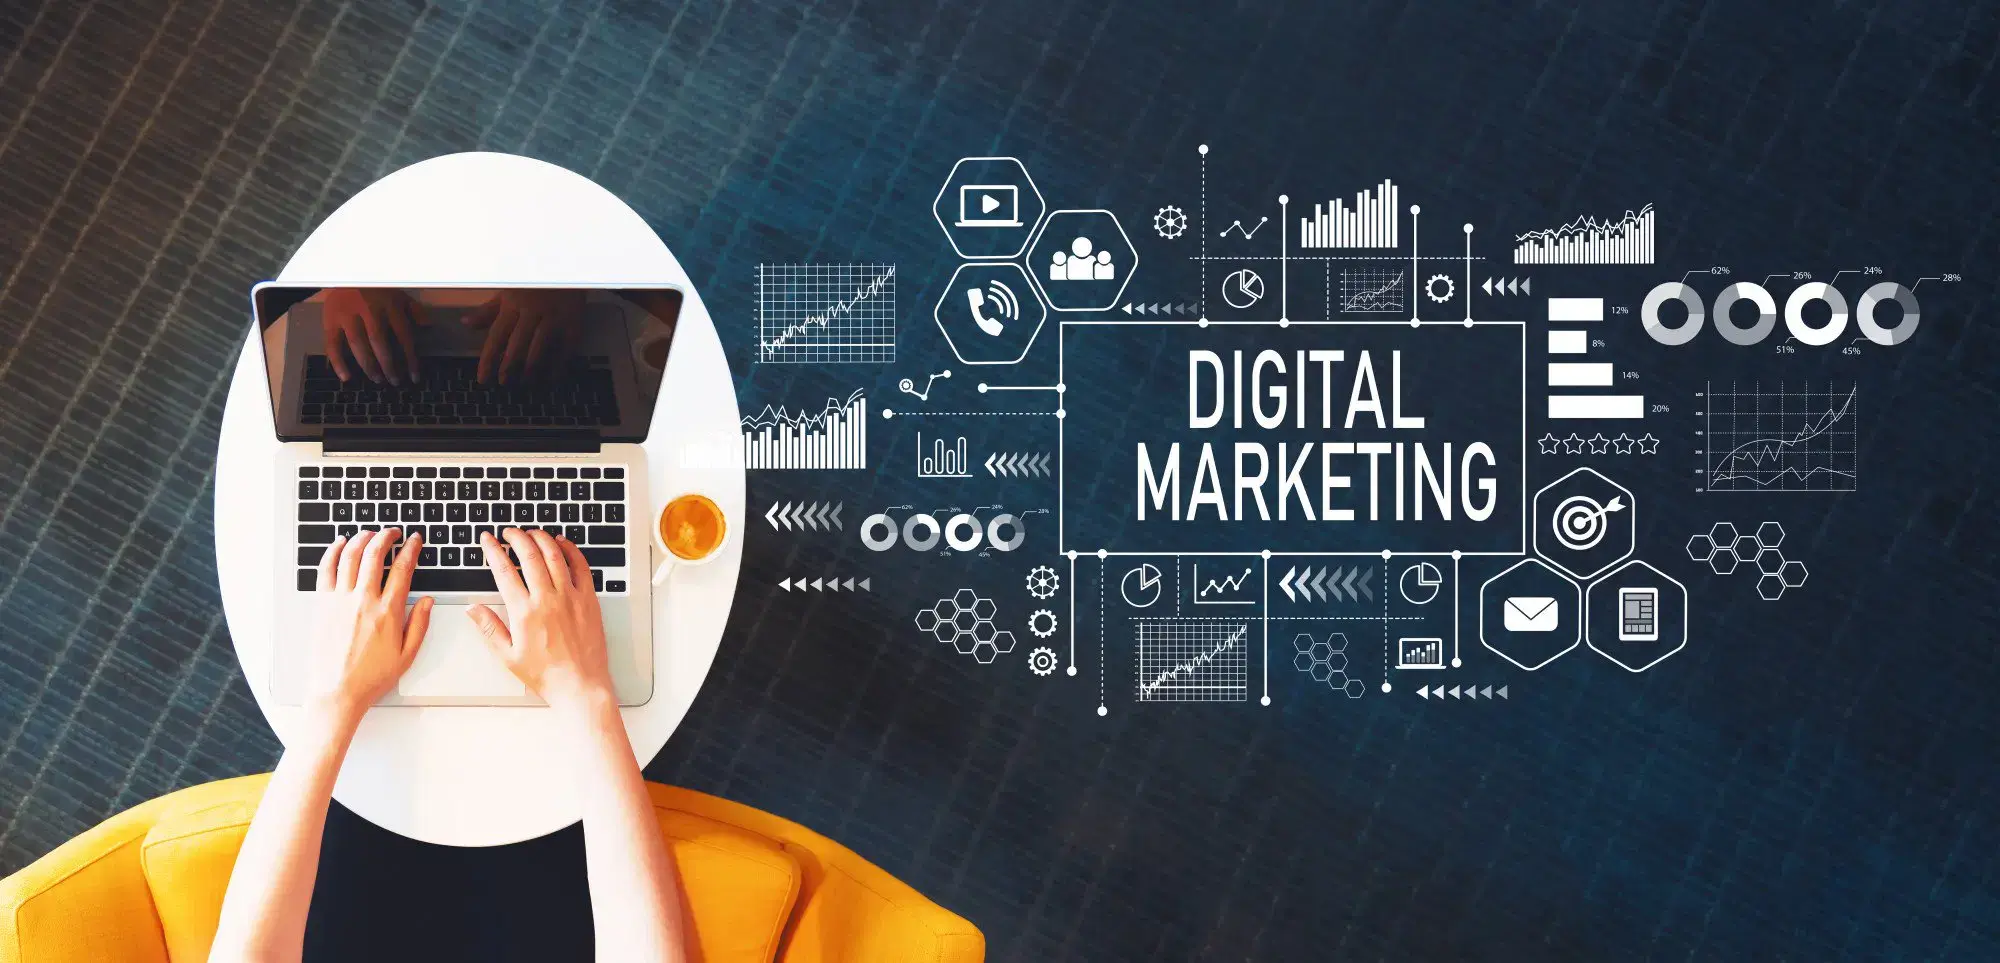 Most common mistakes for not having a digital marketing strategy